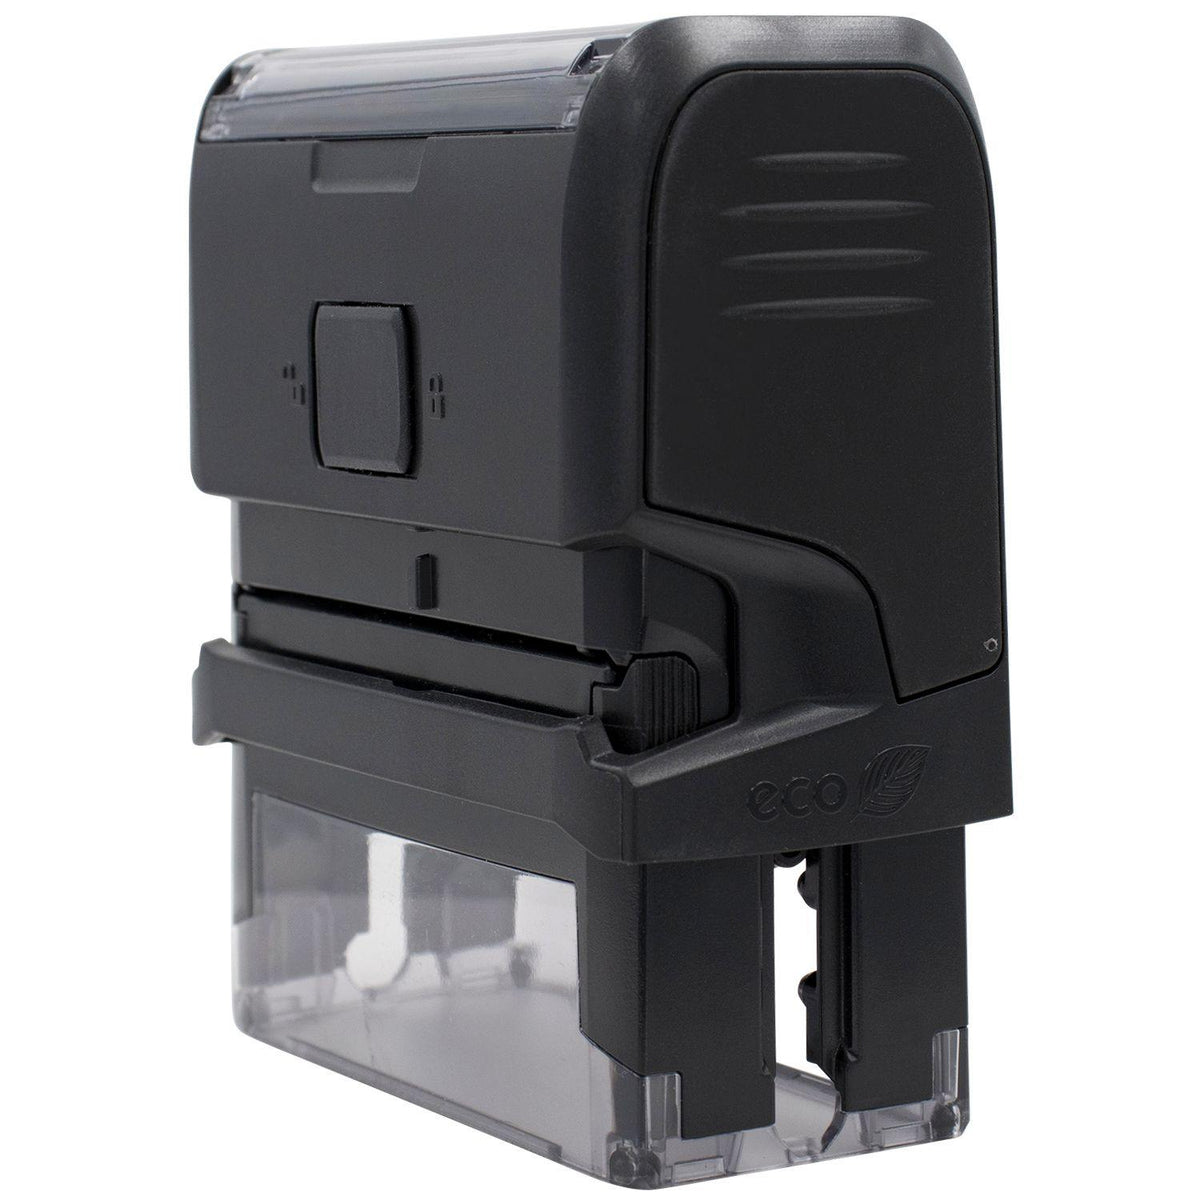 Self-Inking Void with X Stamp - Engineer Seal Stamps - Brand_Trodat, Impression Size_Small, Stamp Type_Self-Inking Stamp, Type of Use_General, Type of Use_Legal, Type of Use_Office